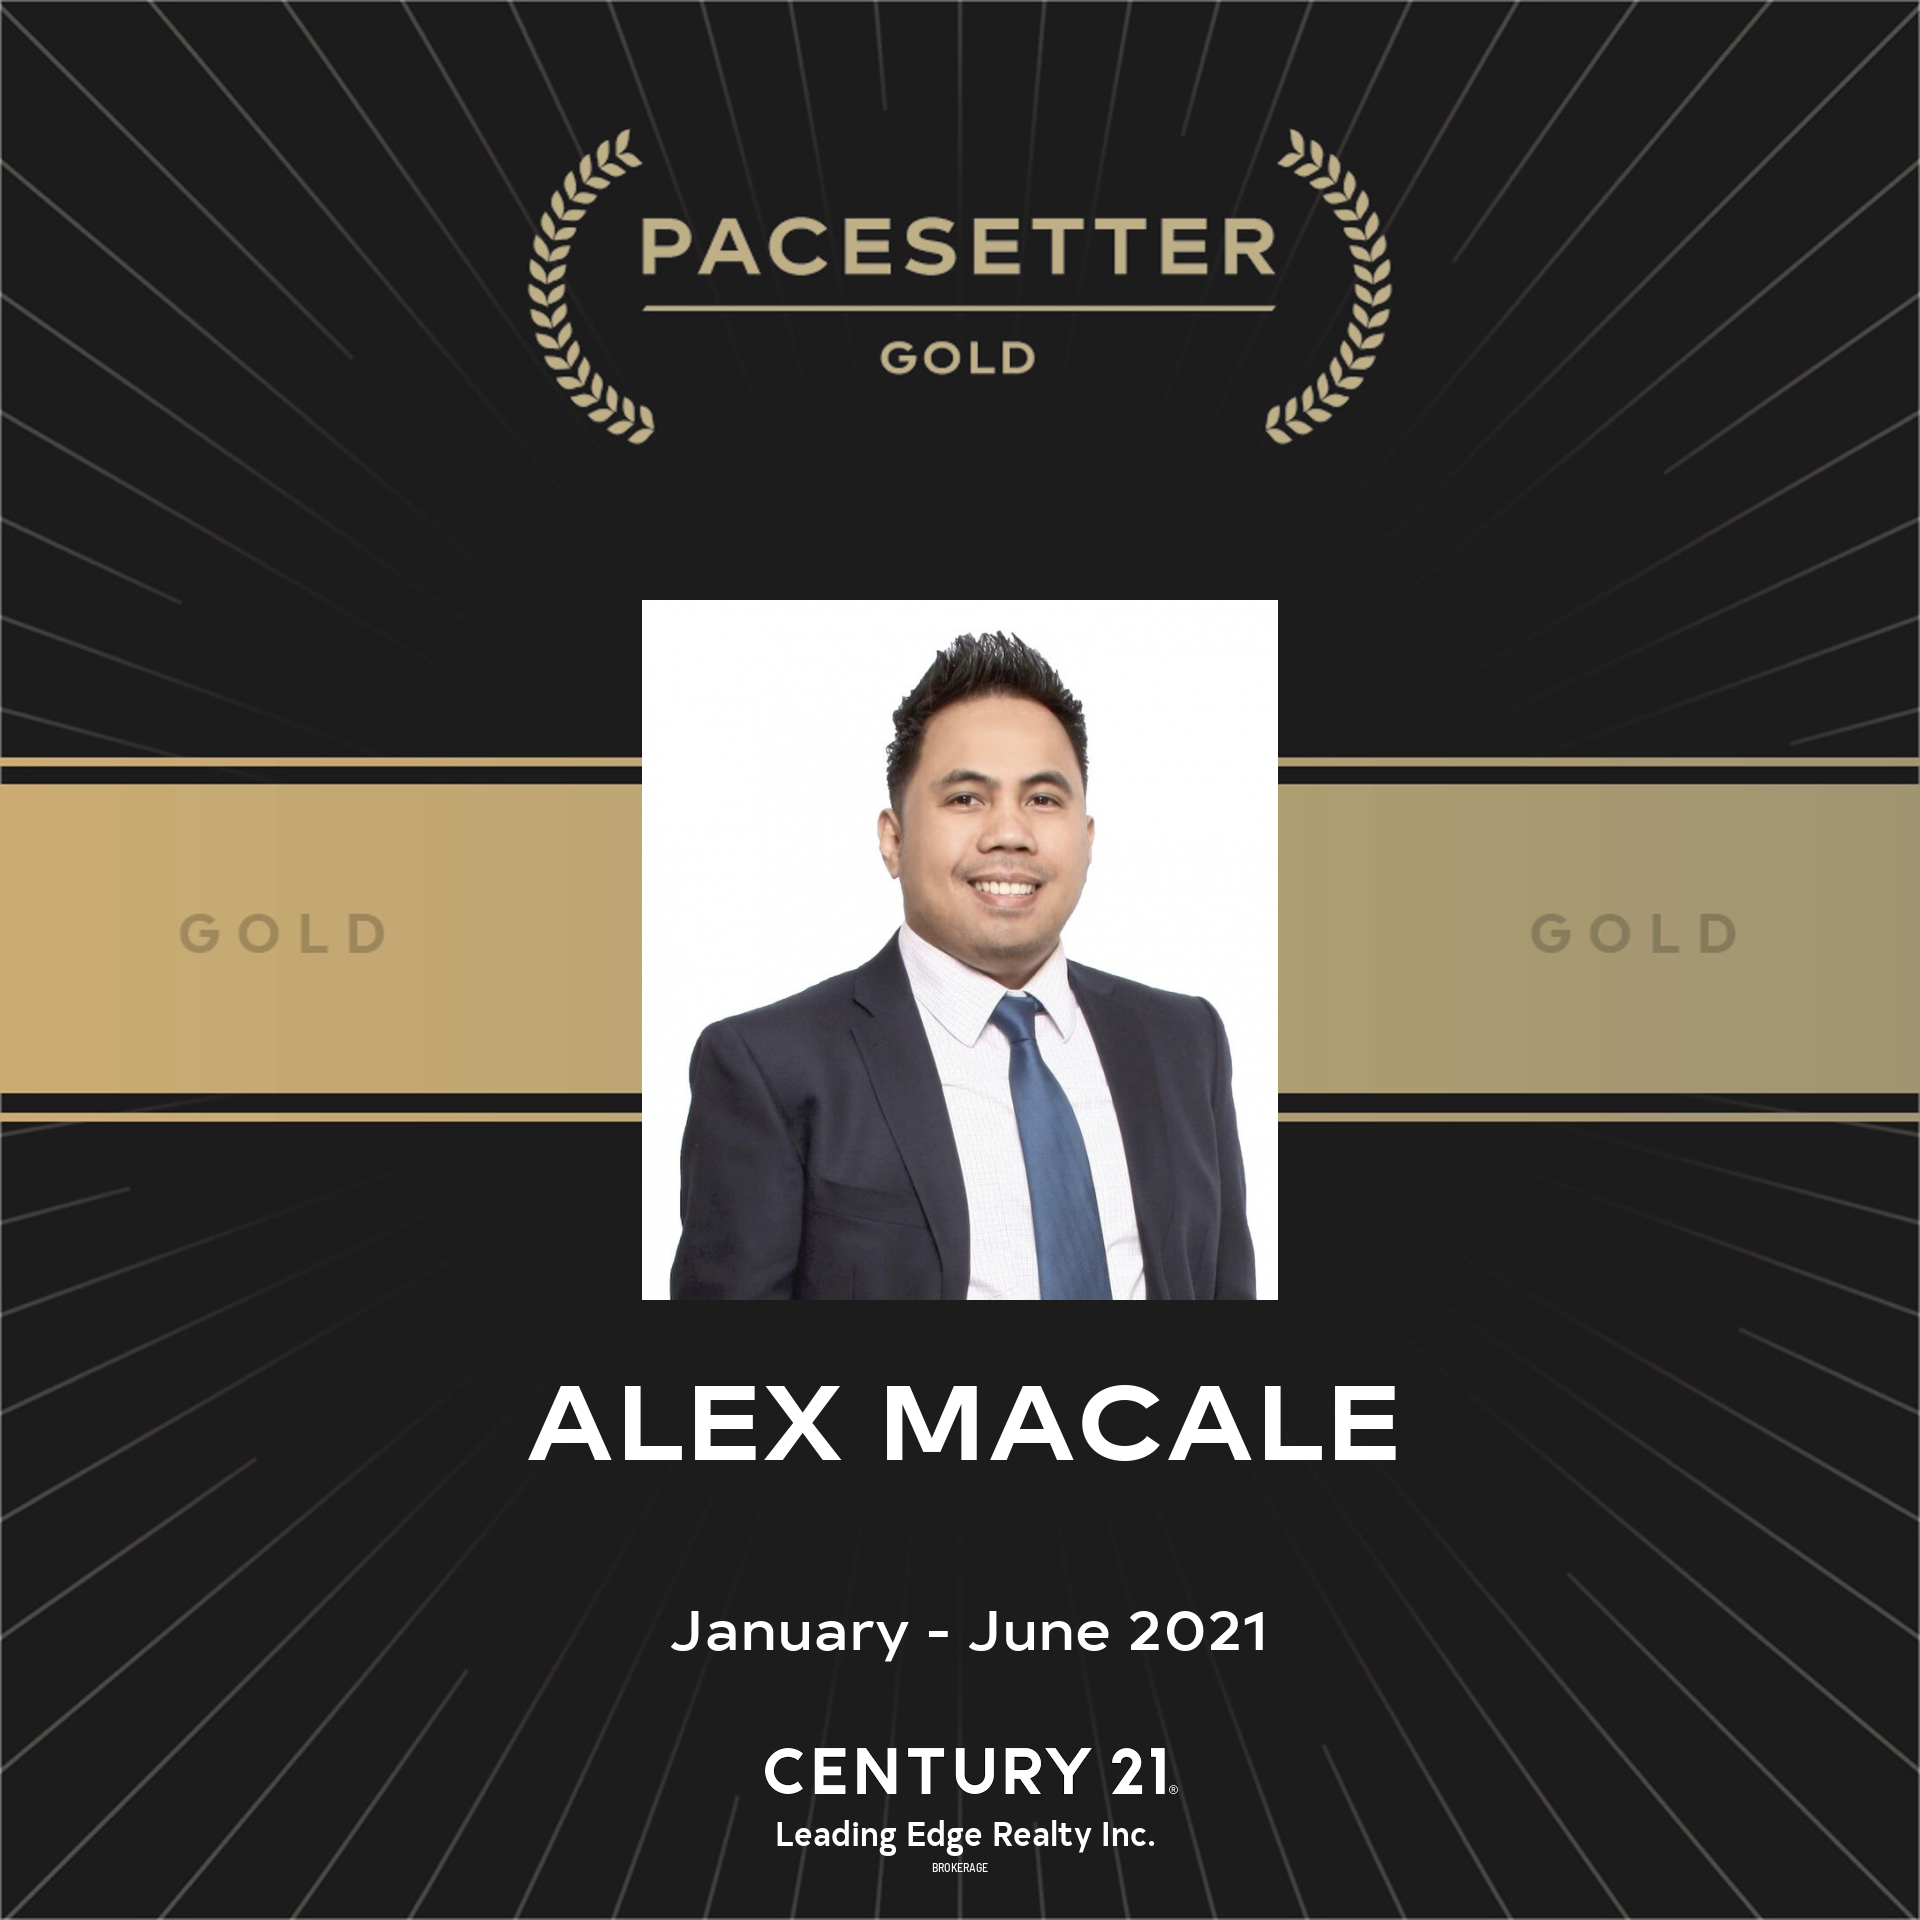 alex-macale-pacesetter gold